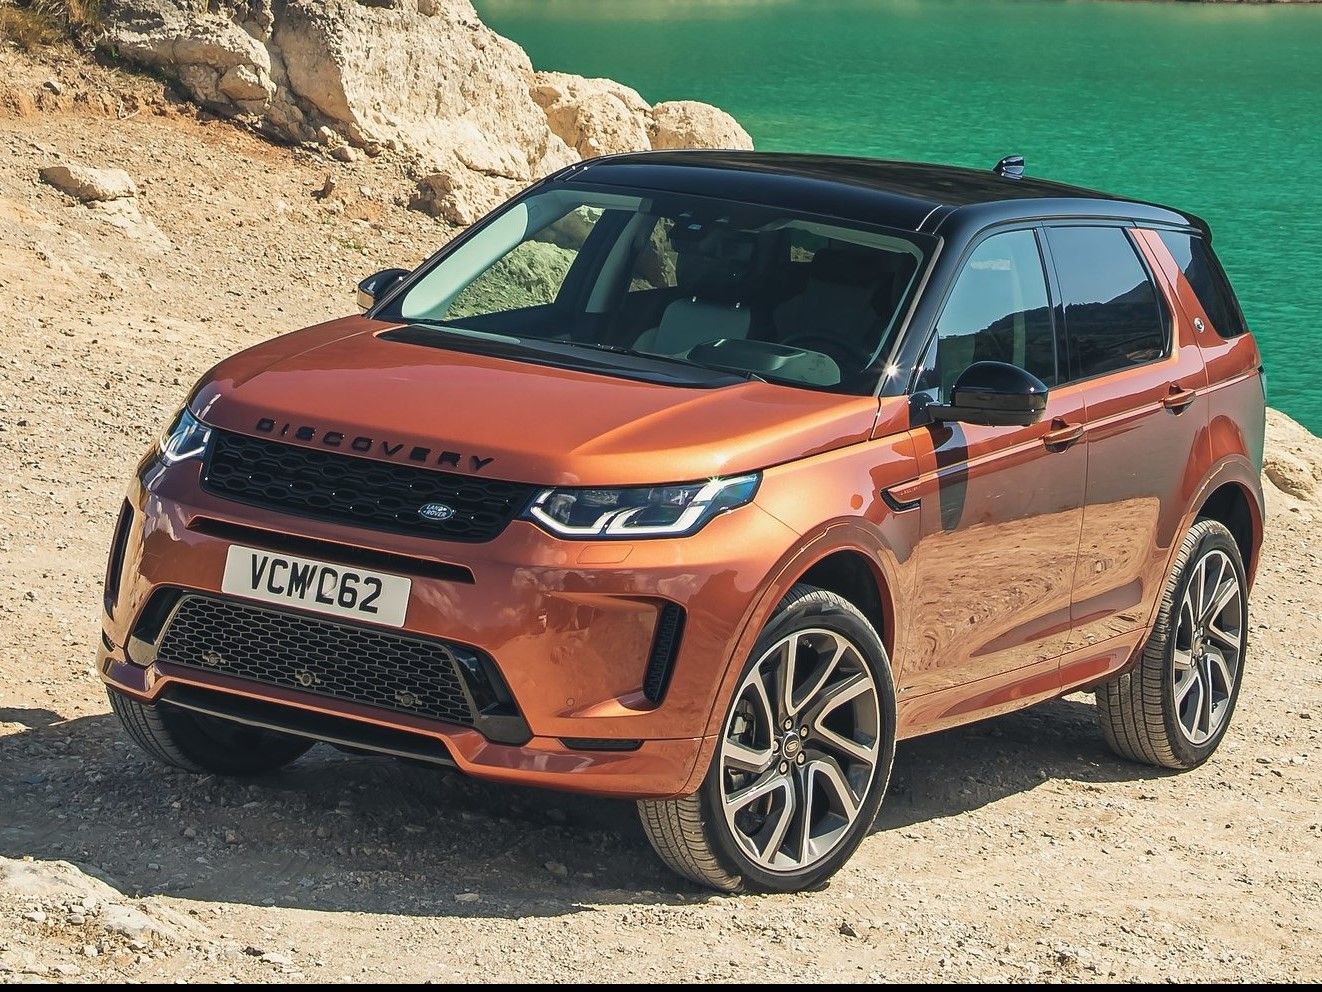 2020 Land Rover Discovery Sport Suv India Launch Tomorrow Expected Price Bs6 Engines Features Exterior And Interior Details Zigwheels